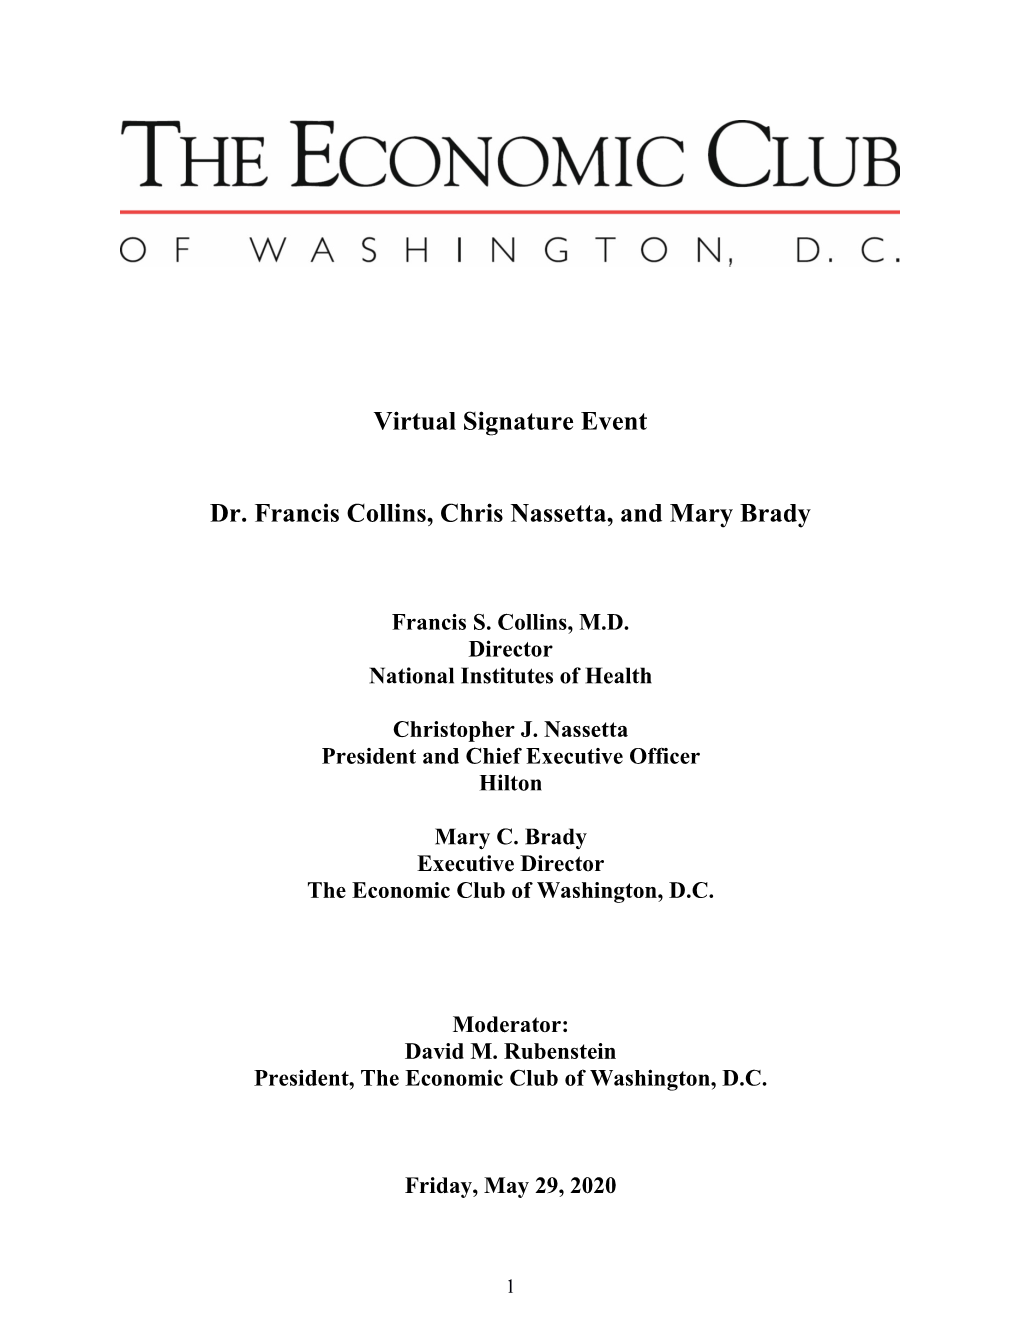 Virtual Signature Event Dr. Francis Collins, Chris Nassetta, and Mary